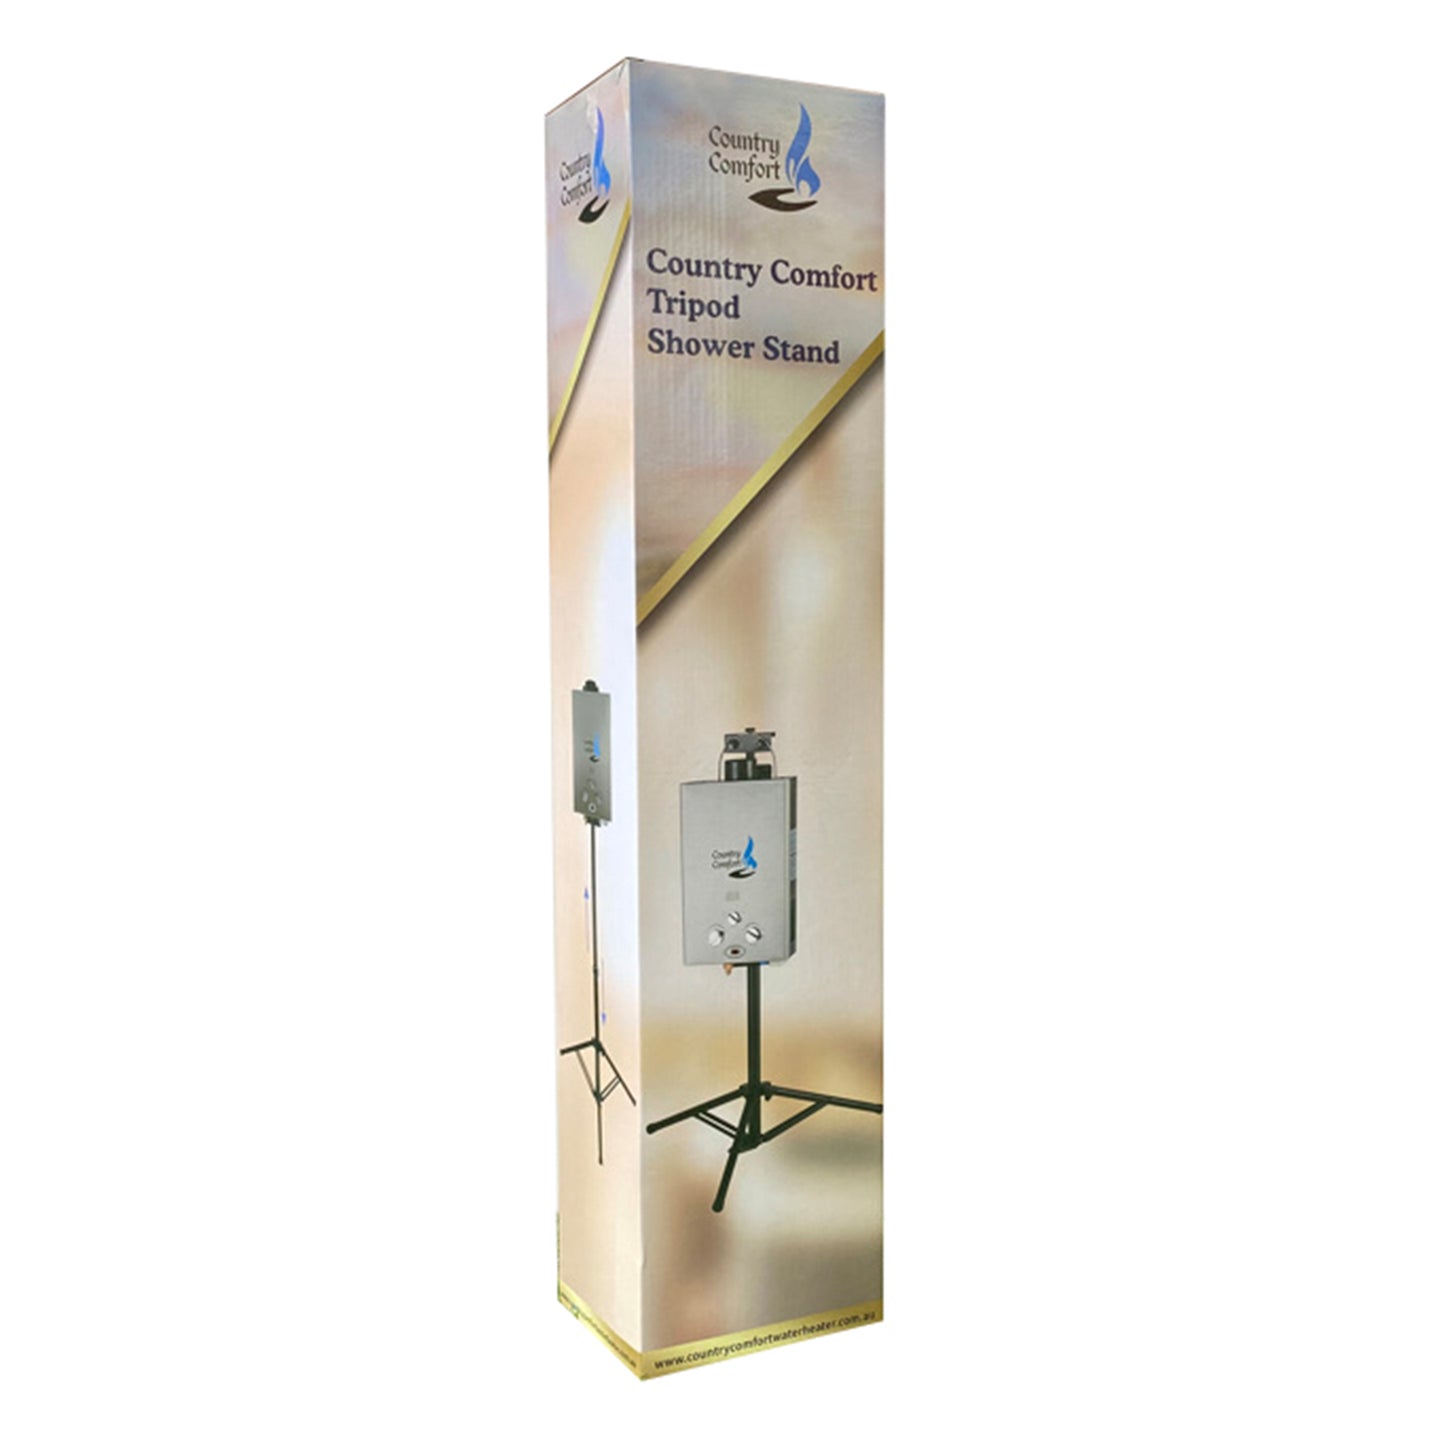 Country-Comfort-Tripod-Shower-Stand-Box